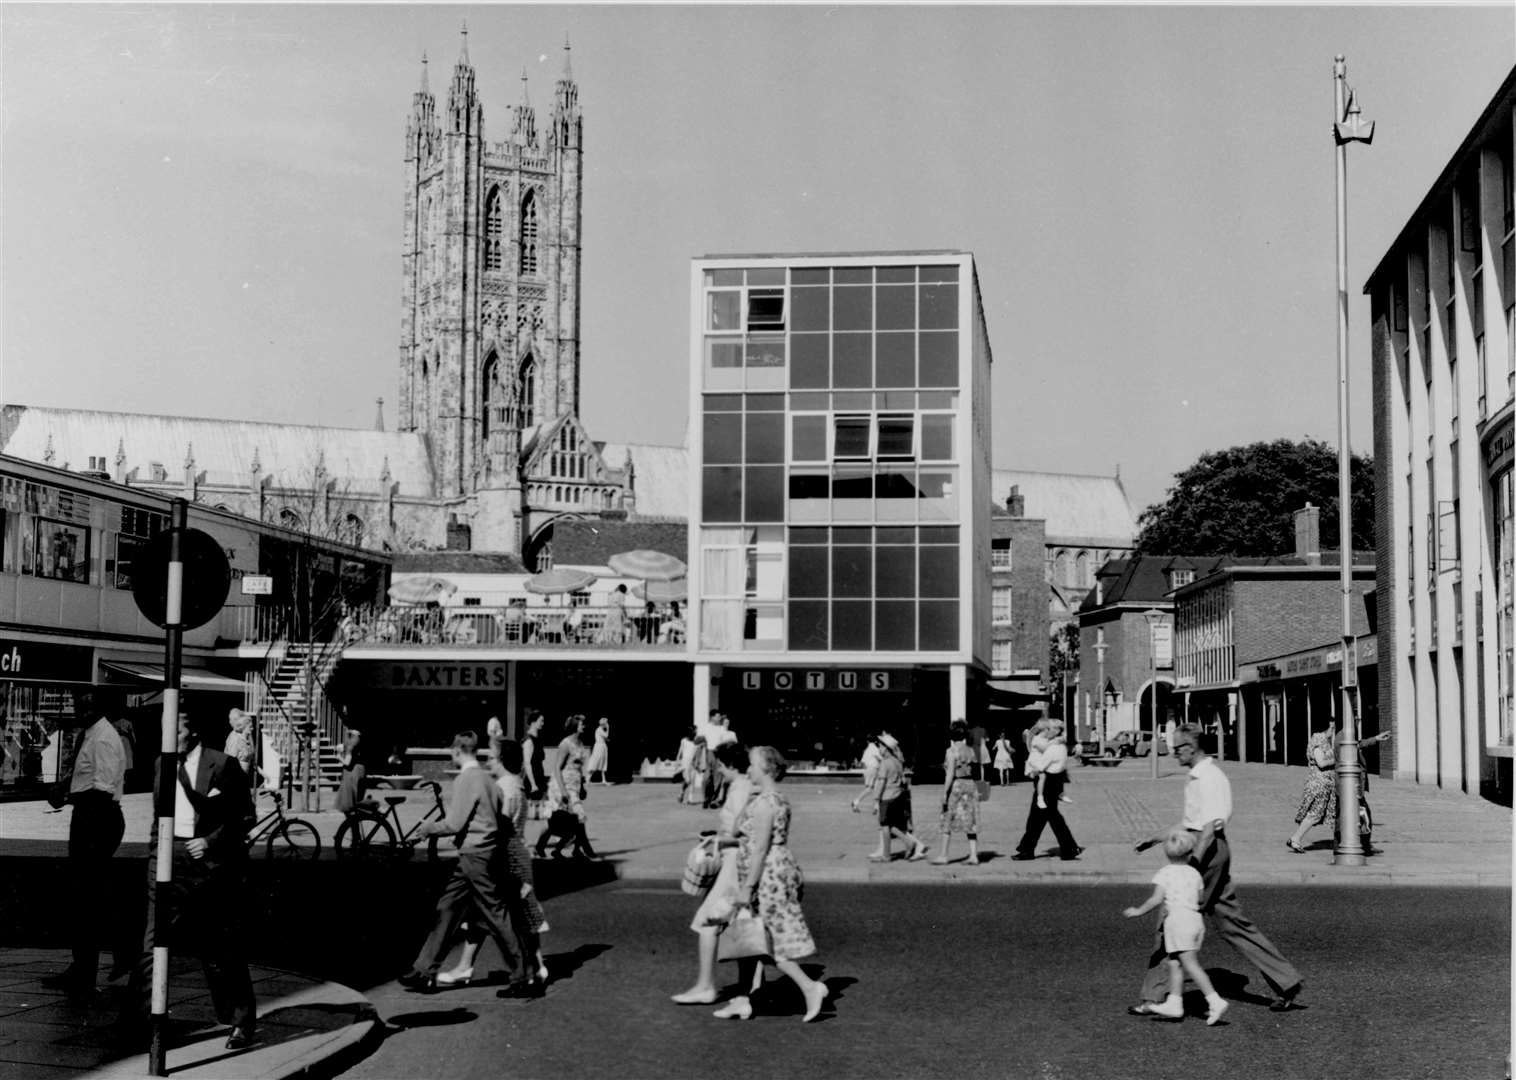 Depending on your point of view, the 'shoe box' building which dominated the post-war redevelopment of the Longmarket, Canterbury, in August 1961was either an eyesore which blocked out the Cathedral or a building which provided tantalising glimpses of it. The adjoining cafe used the open-air terrace next to it for its customers